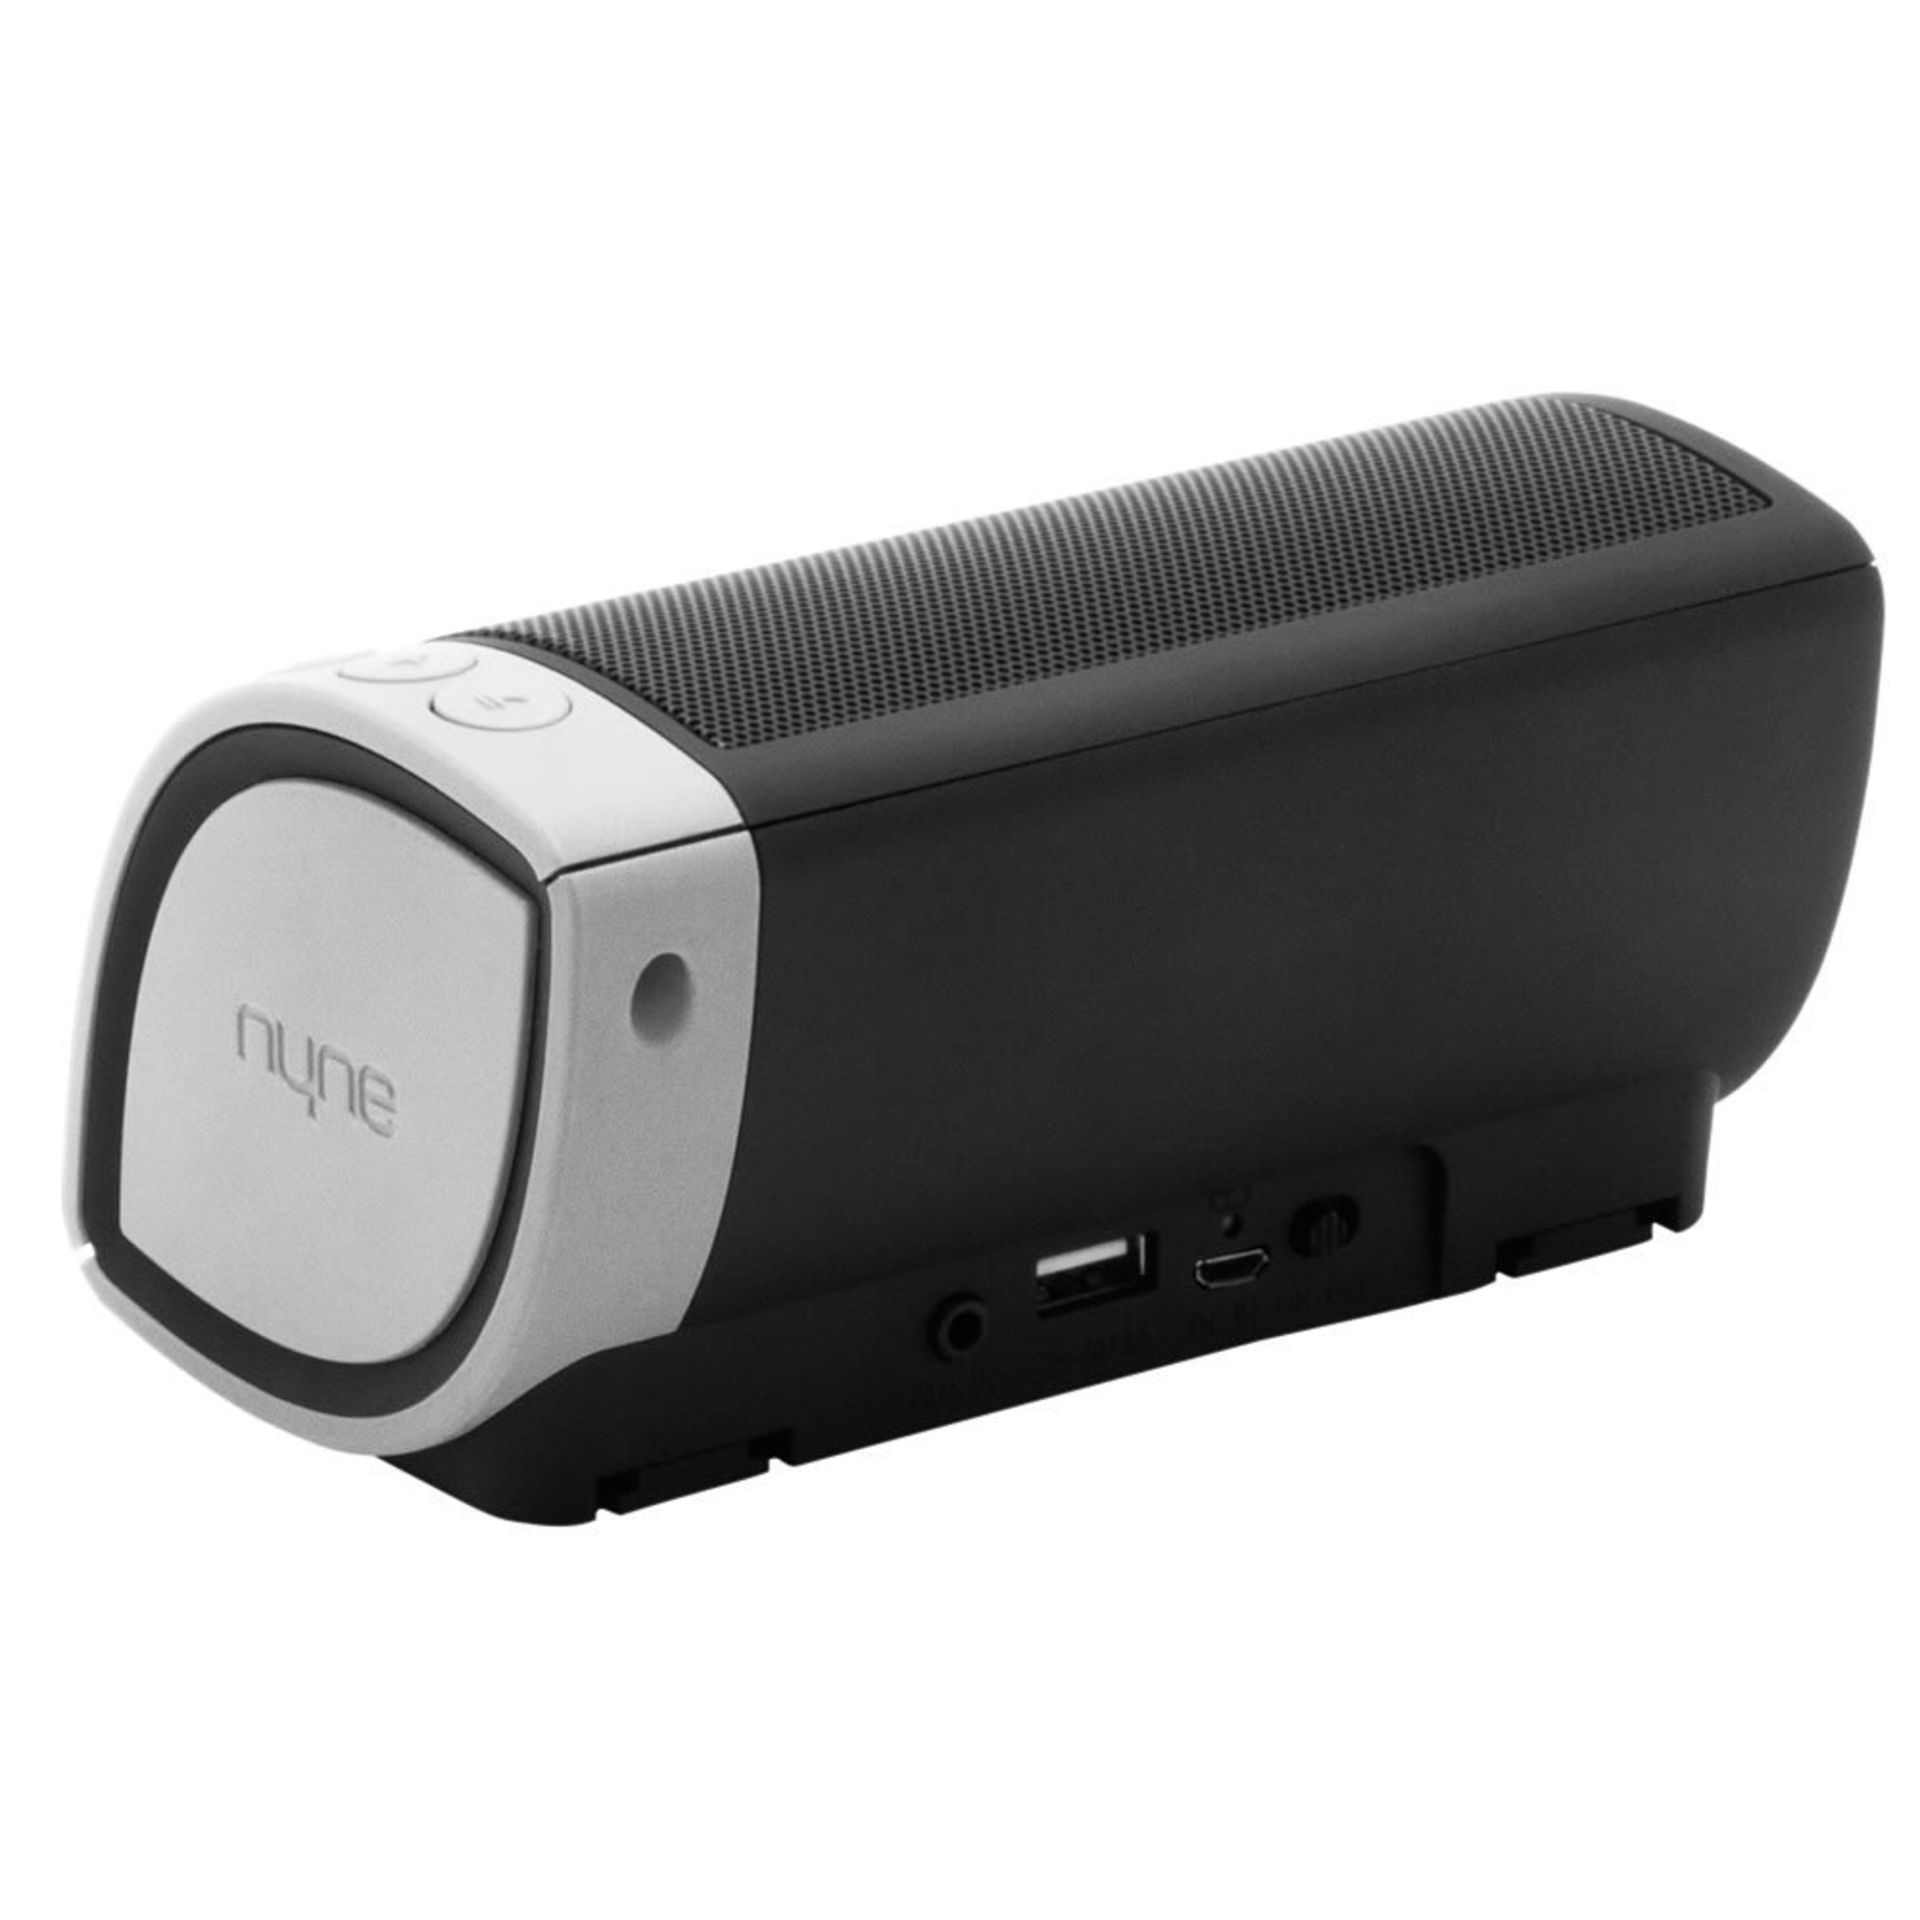 V Brand New Nyne Cruiser Universal Rechargable RUgged Portable Speaker with Built in Microphone - - Image 3 of 3